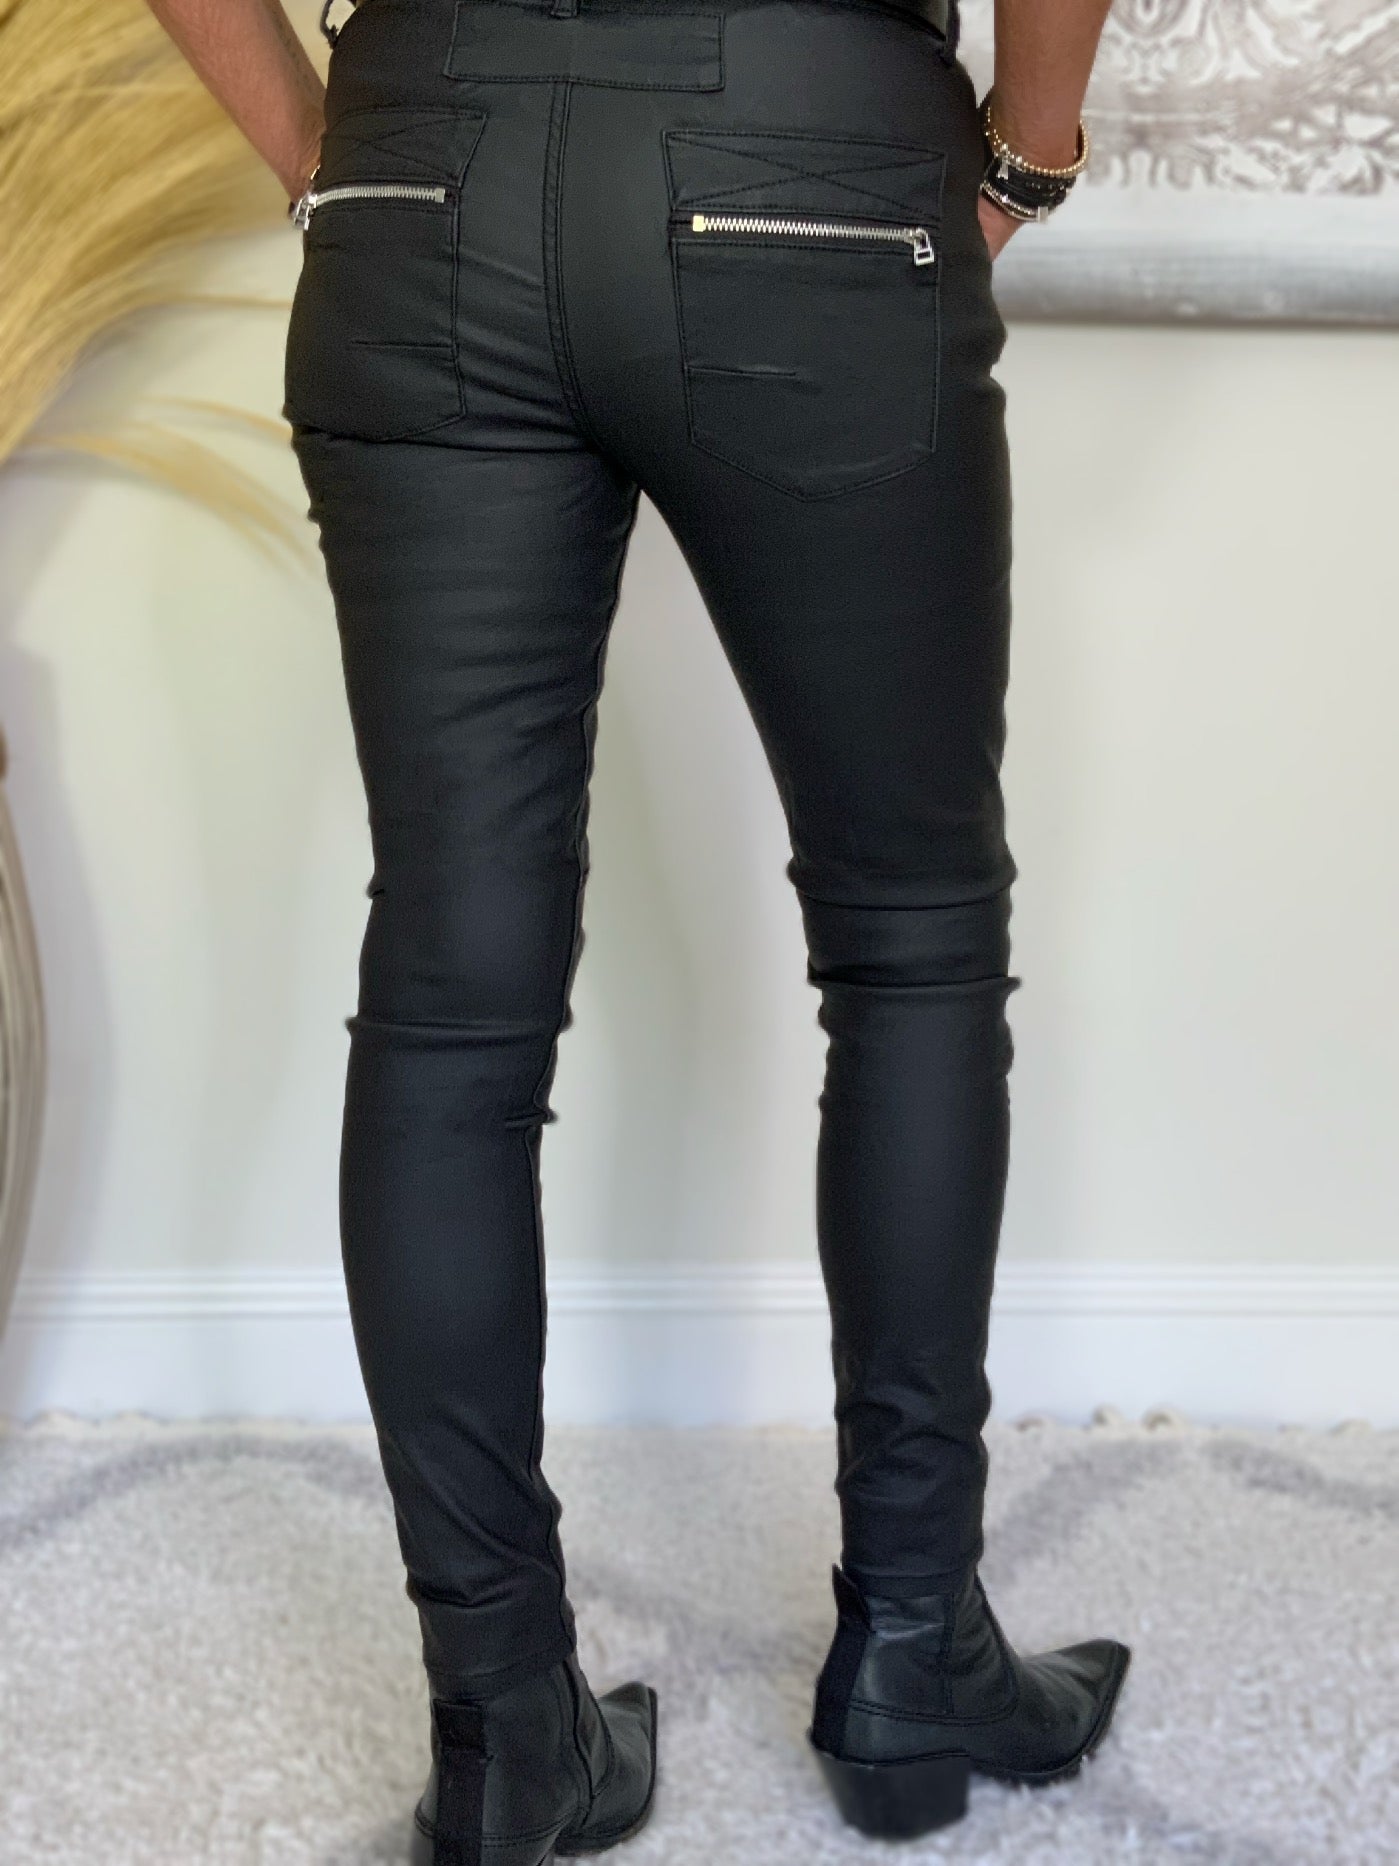 Melly & Co Original Coated Jeans